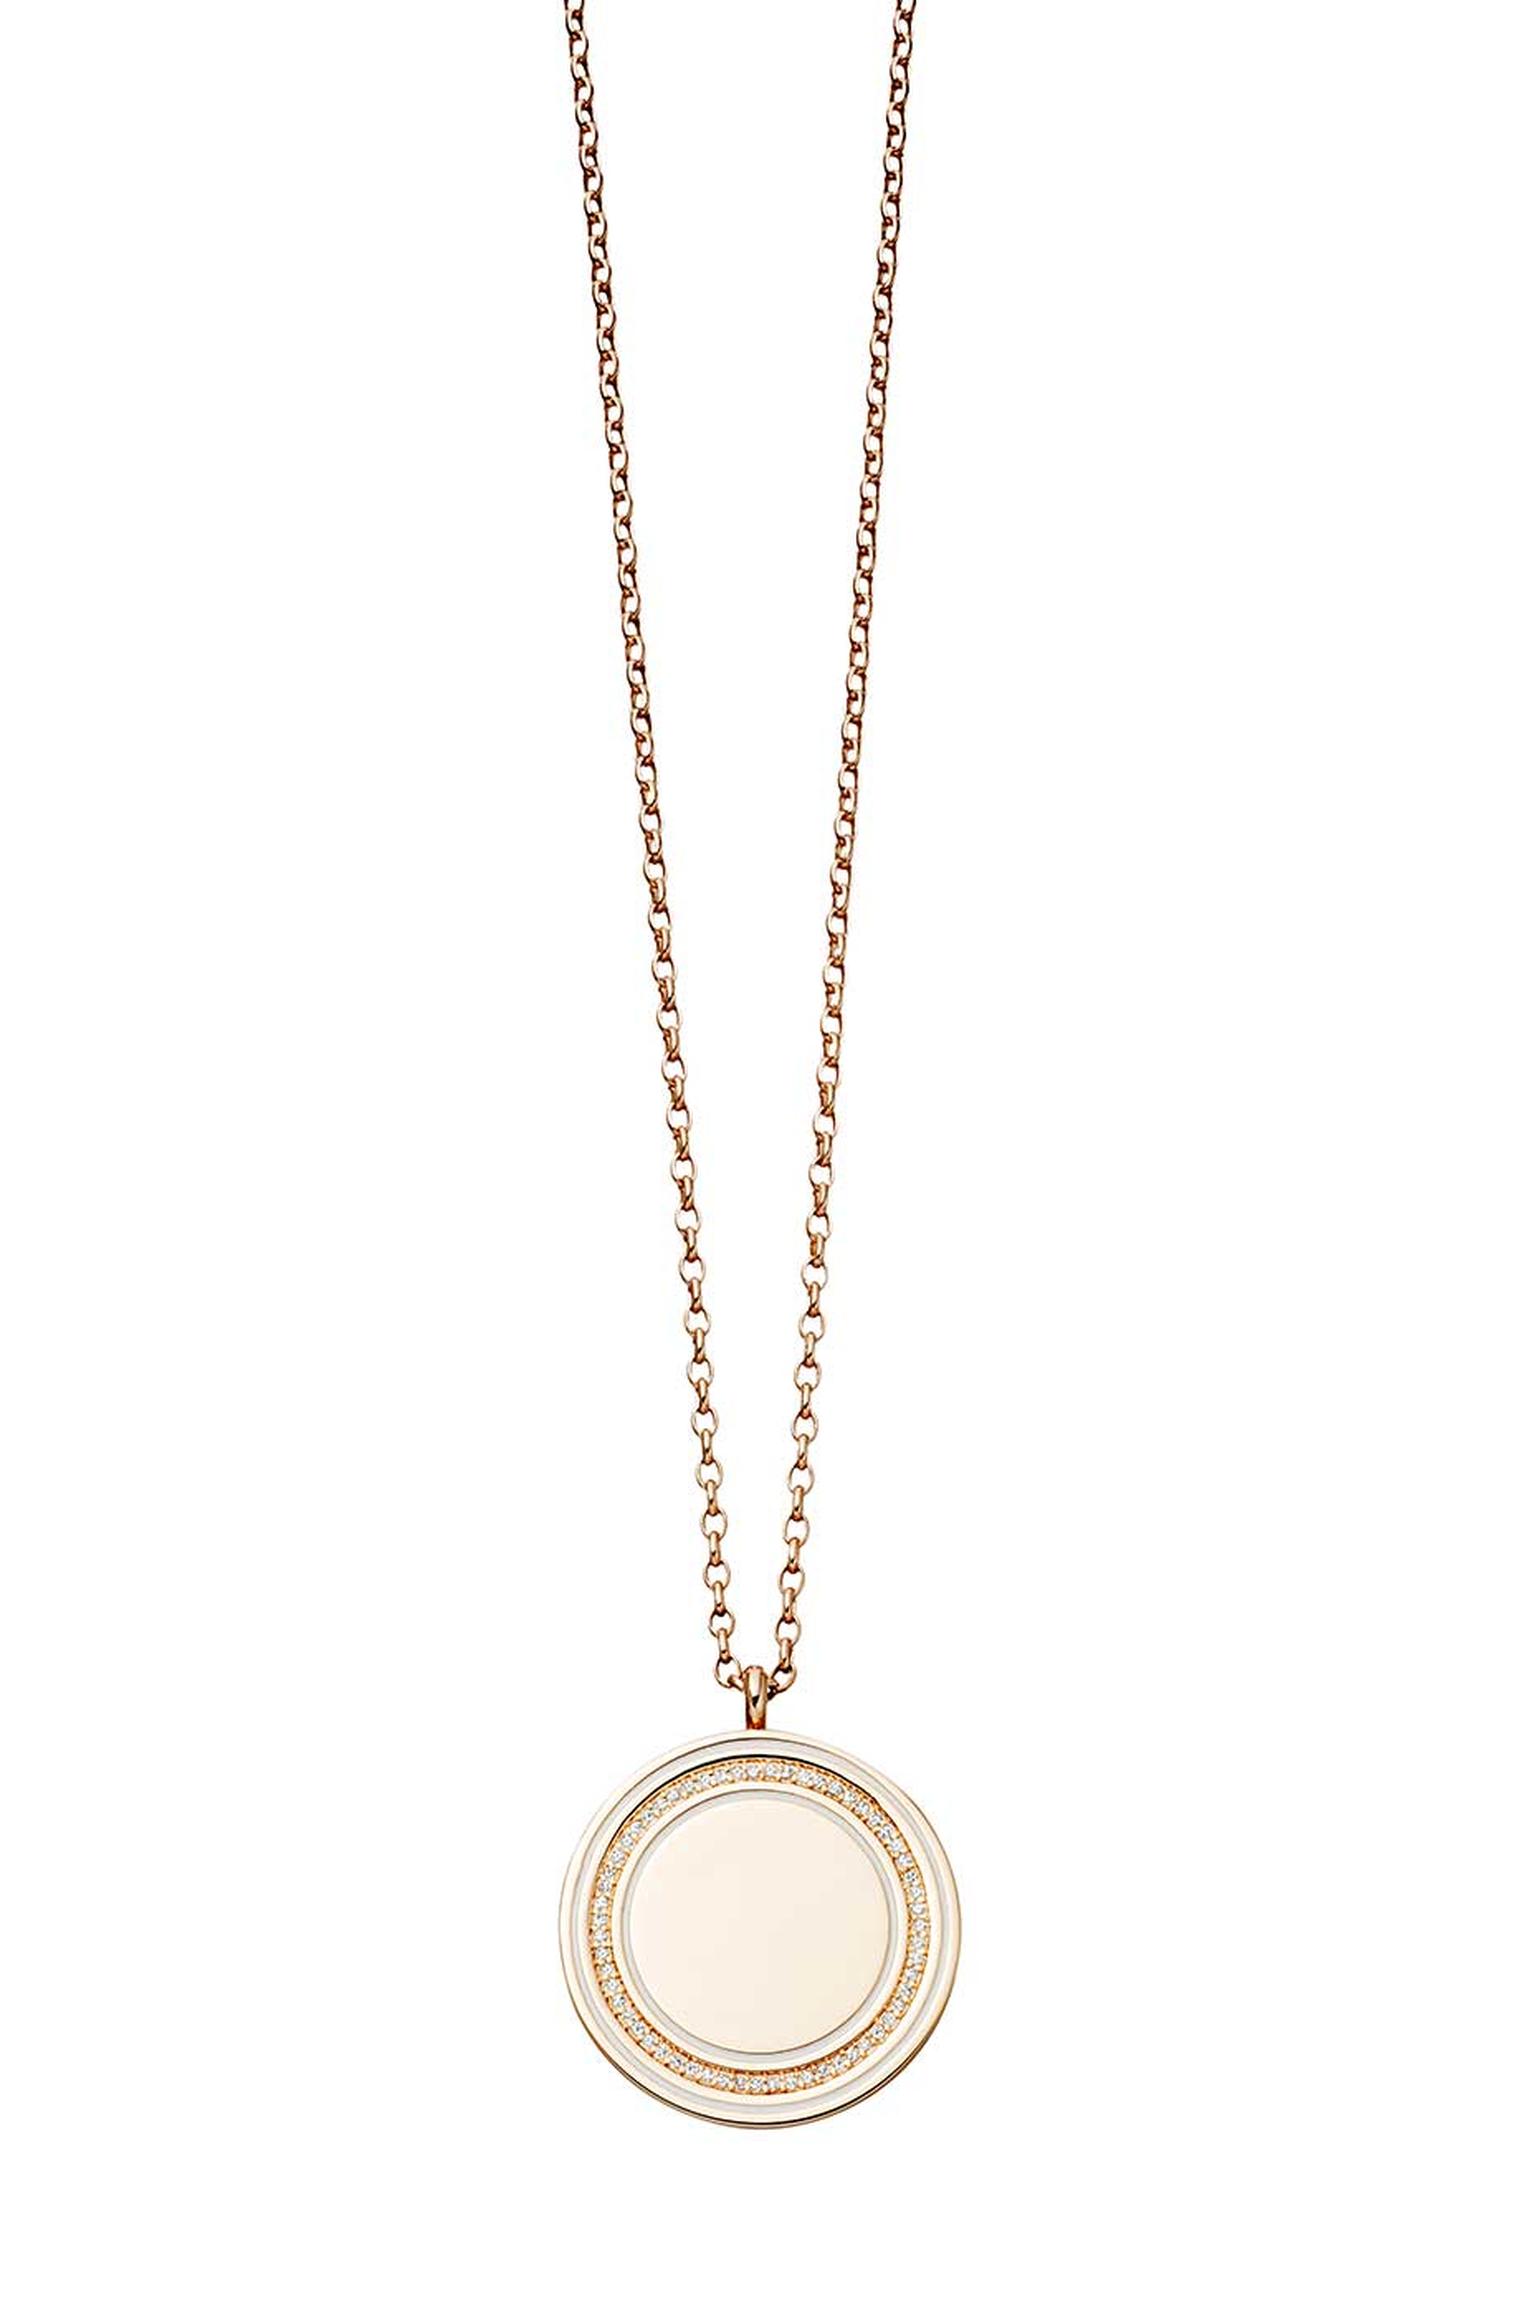 Astley Clarke Giant Moonlight Cosmos locket in rose gold with diamonds (£1,950).